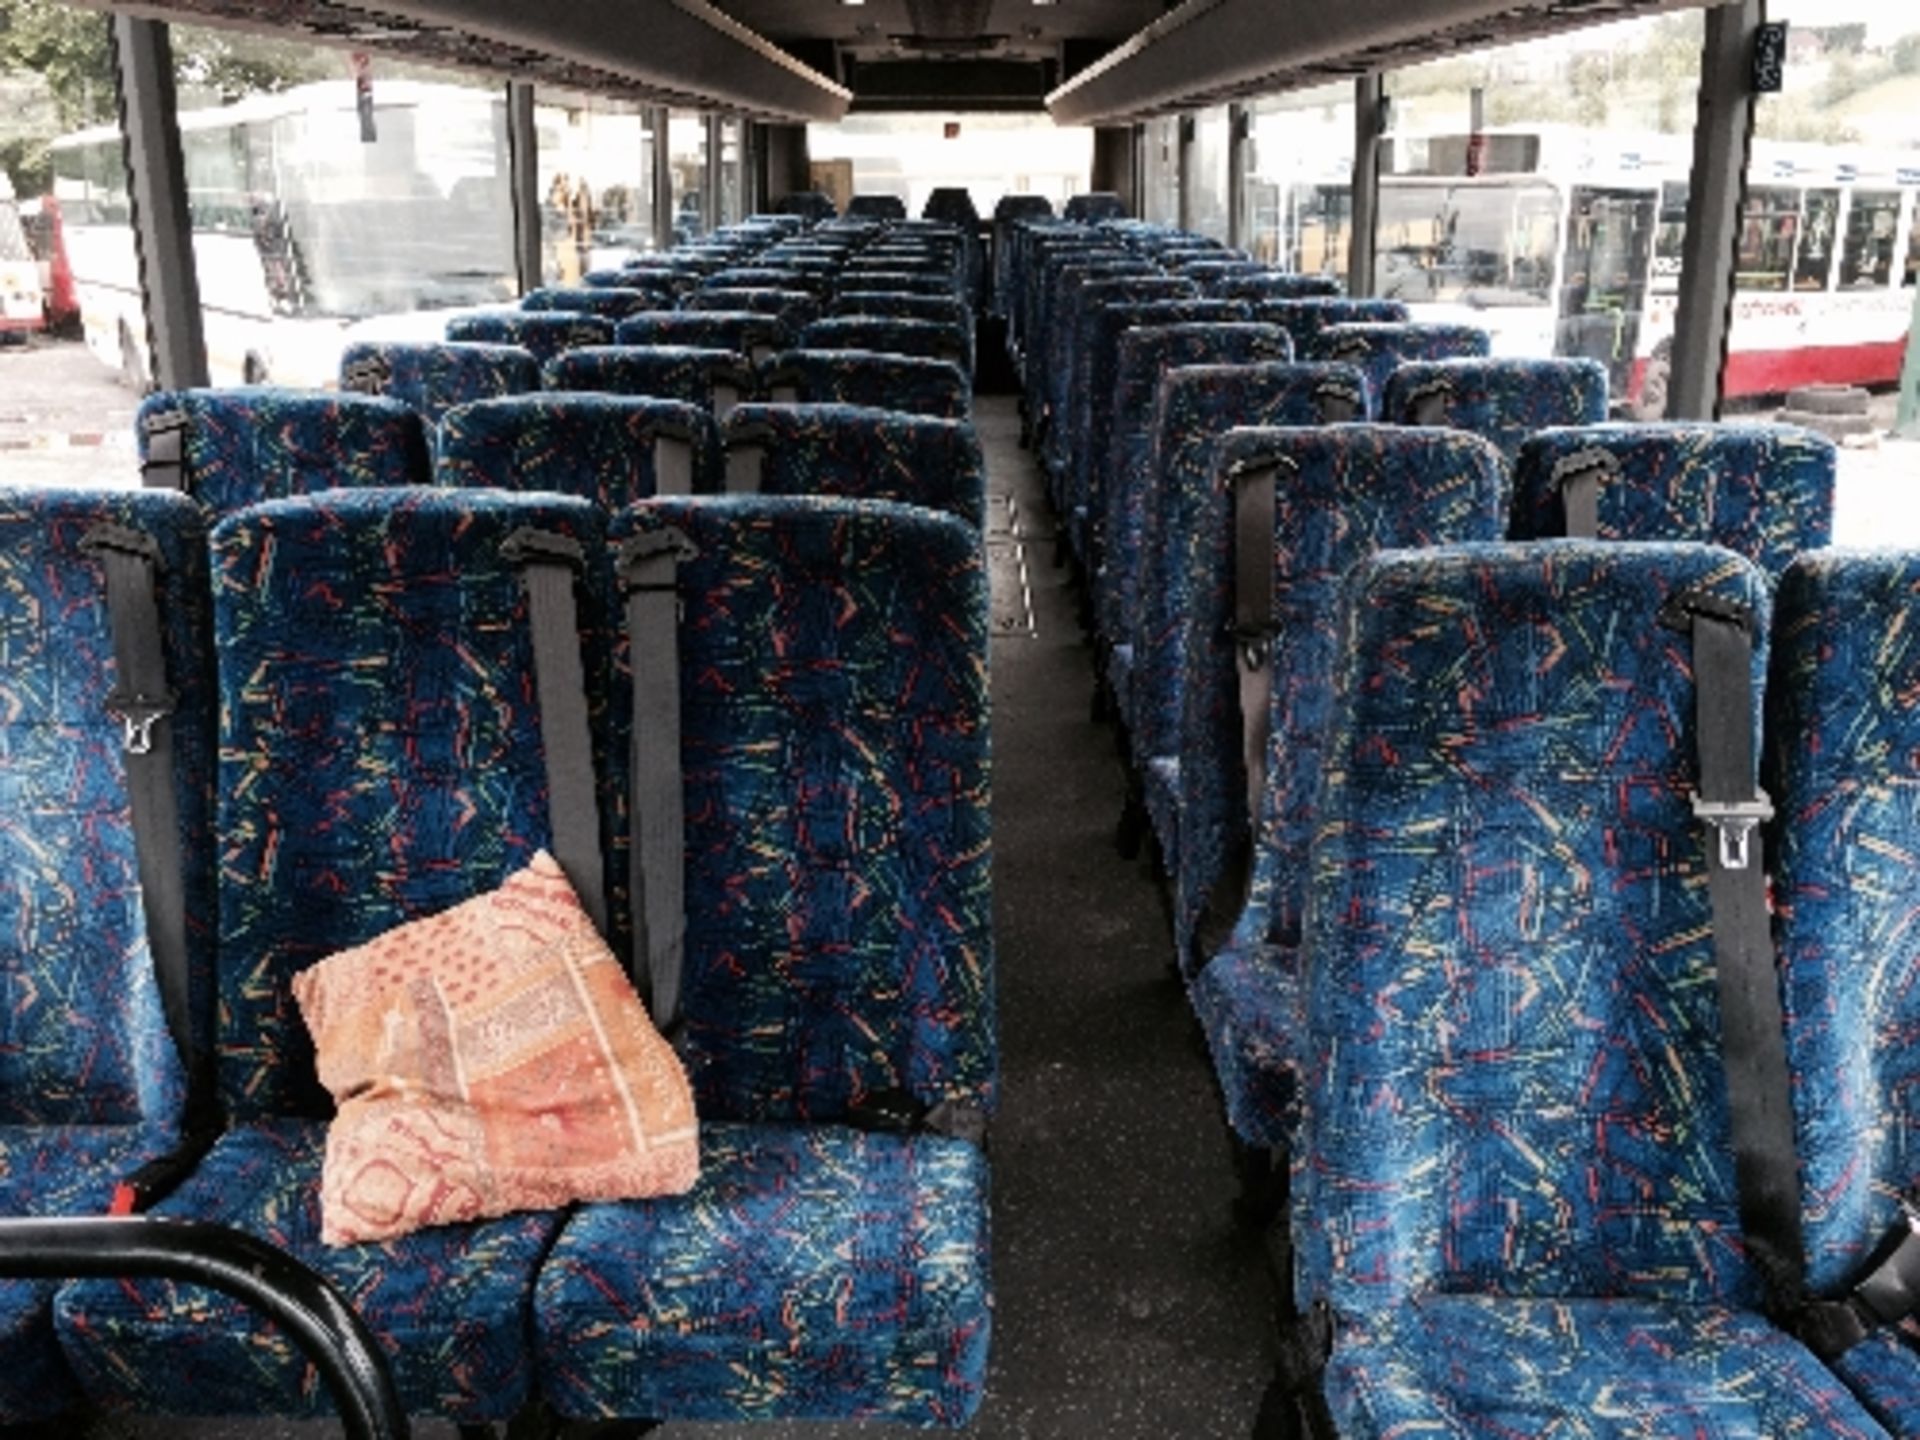 Dennis Javelin / UVG S320 Cutlass 70 seater capacity coach, 3 point seat belts, Registration No. M18 - Image 5 of 6